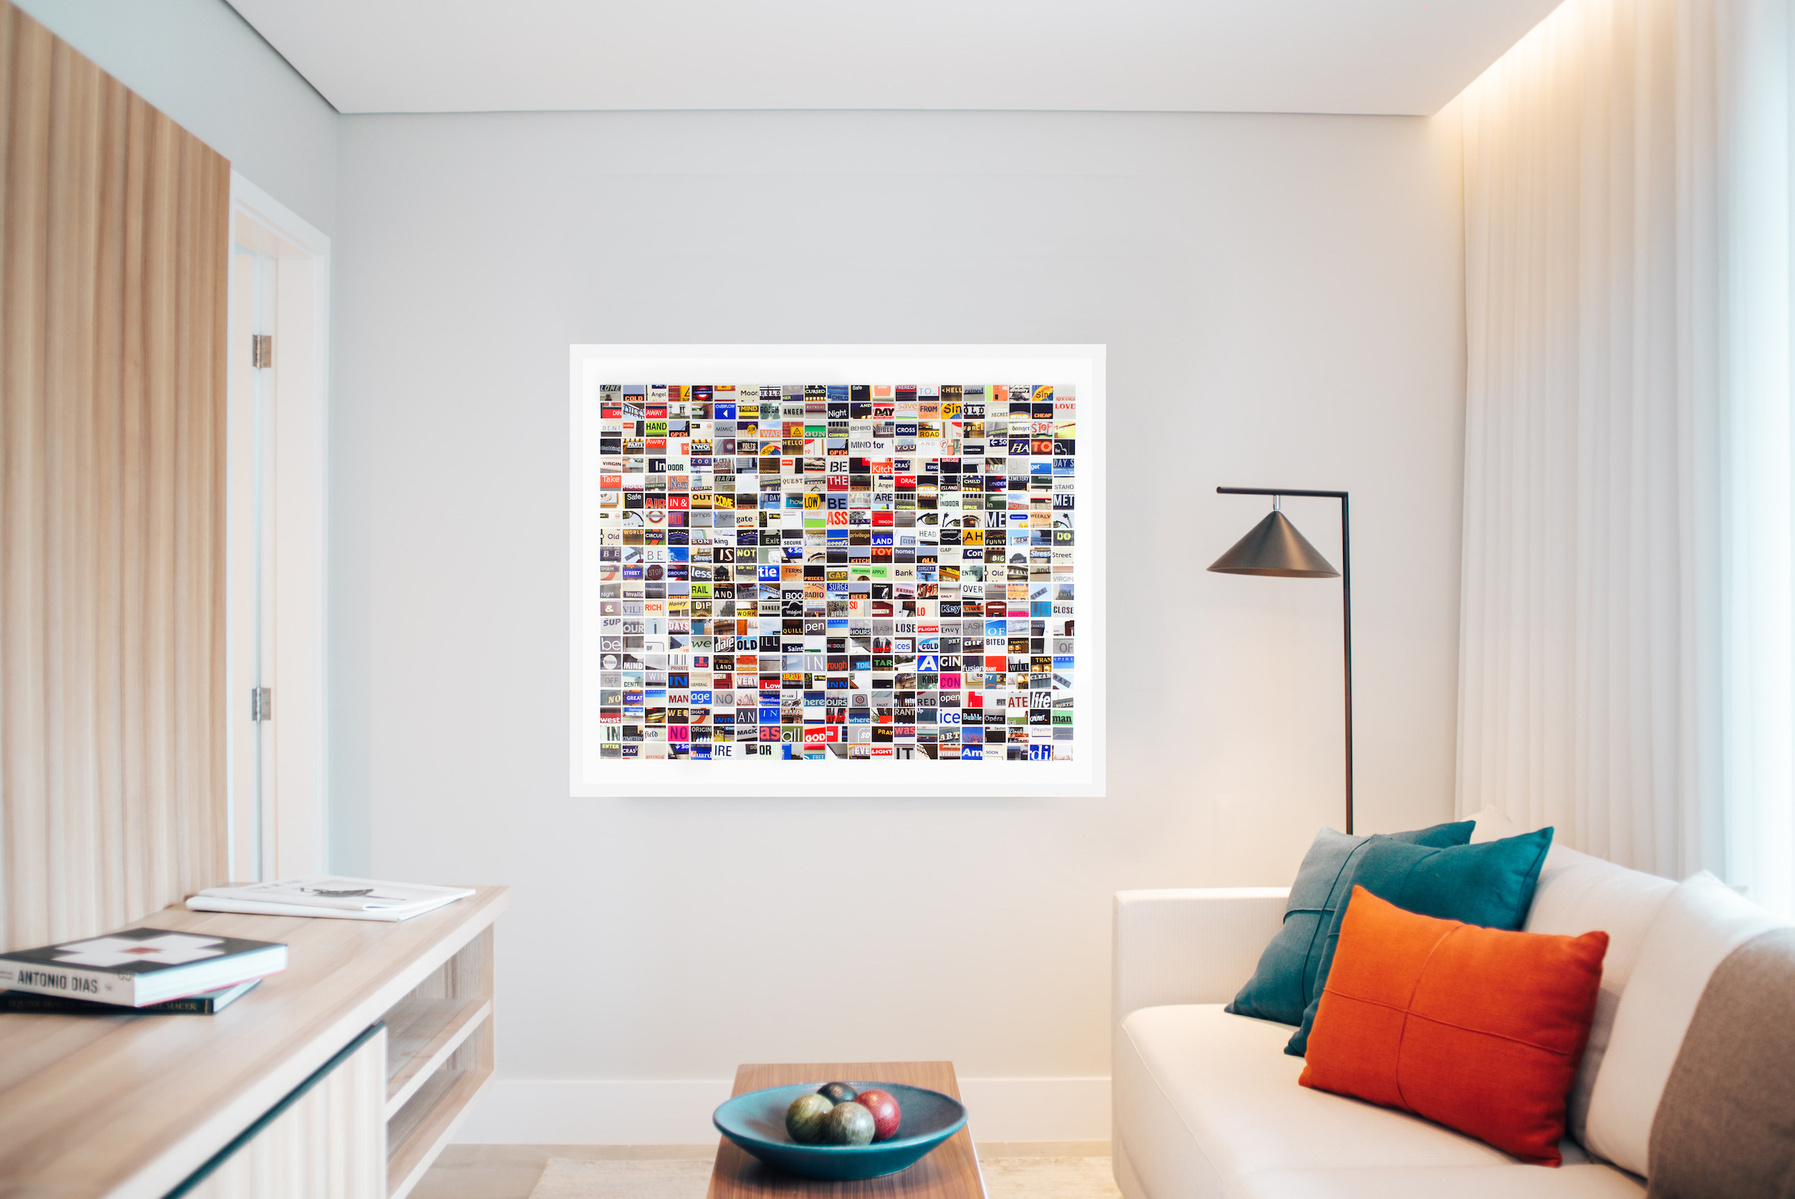 In-situ contemporary art in a living room. Lone Cold Angel - grid of small hand cut photos of street signage words by visual artist Diane Allison HALLISON Studios Tasmania.  Colourful grid of words is a type of narrative, concrete poetry, poem, prose.